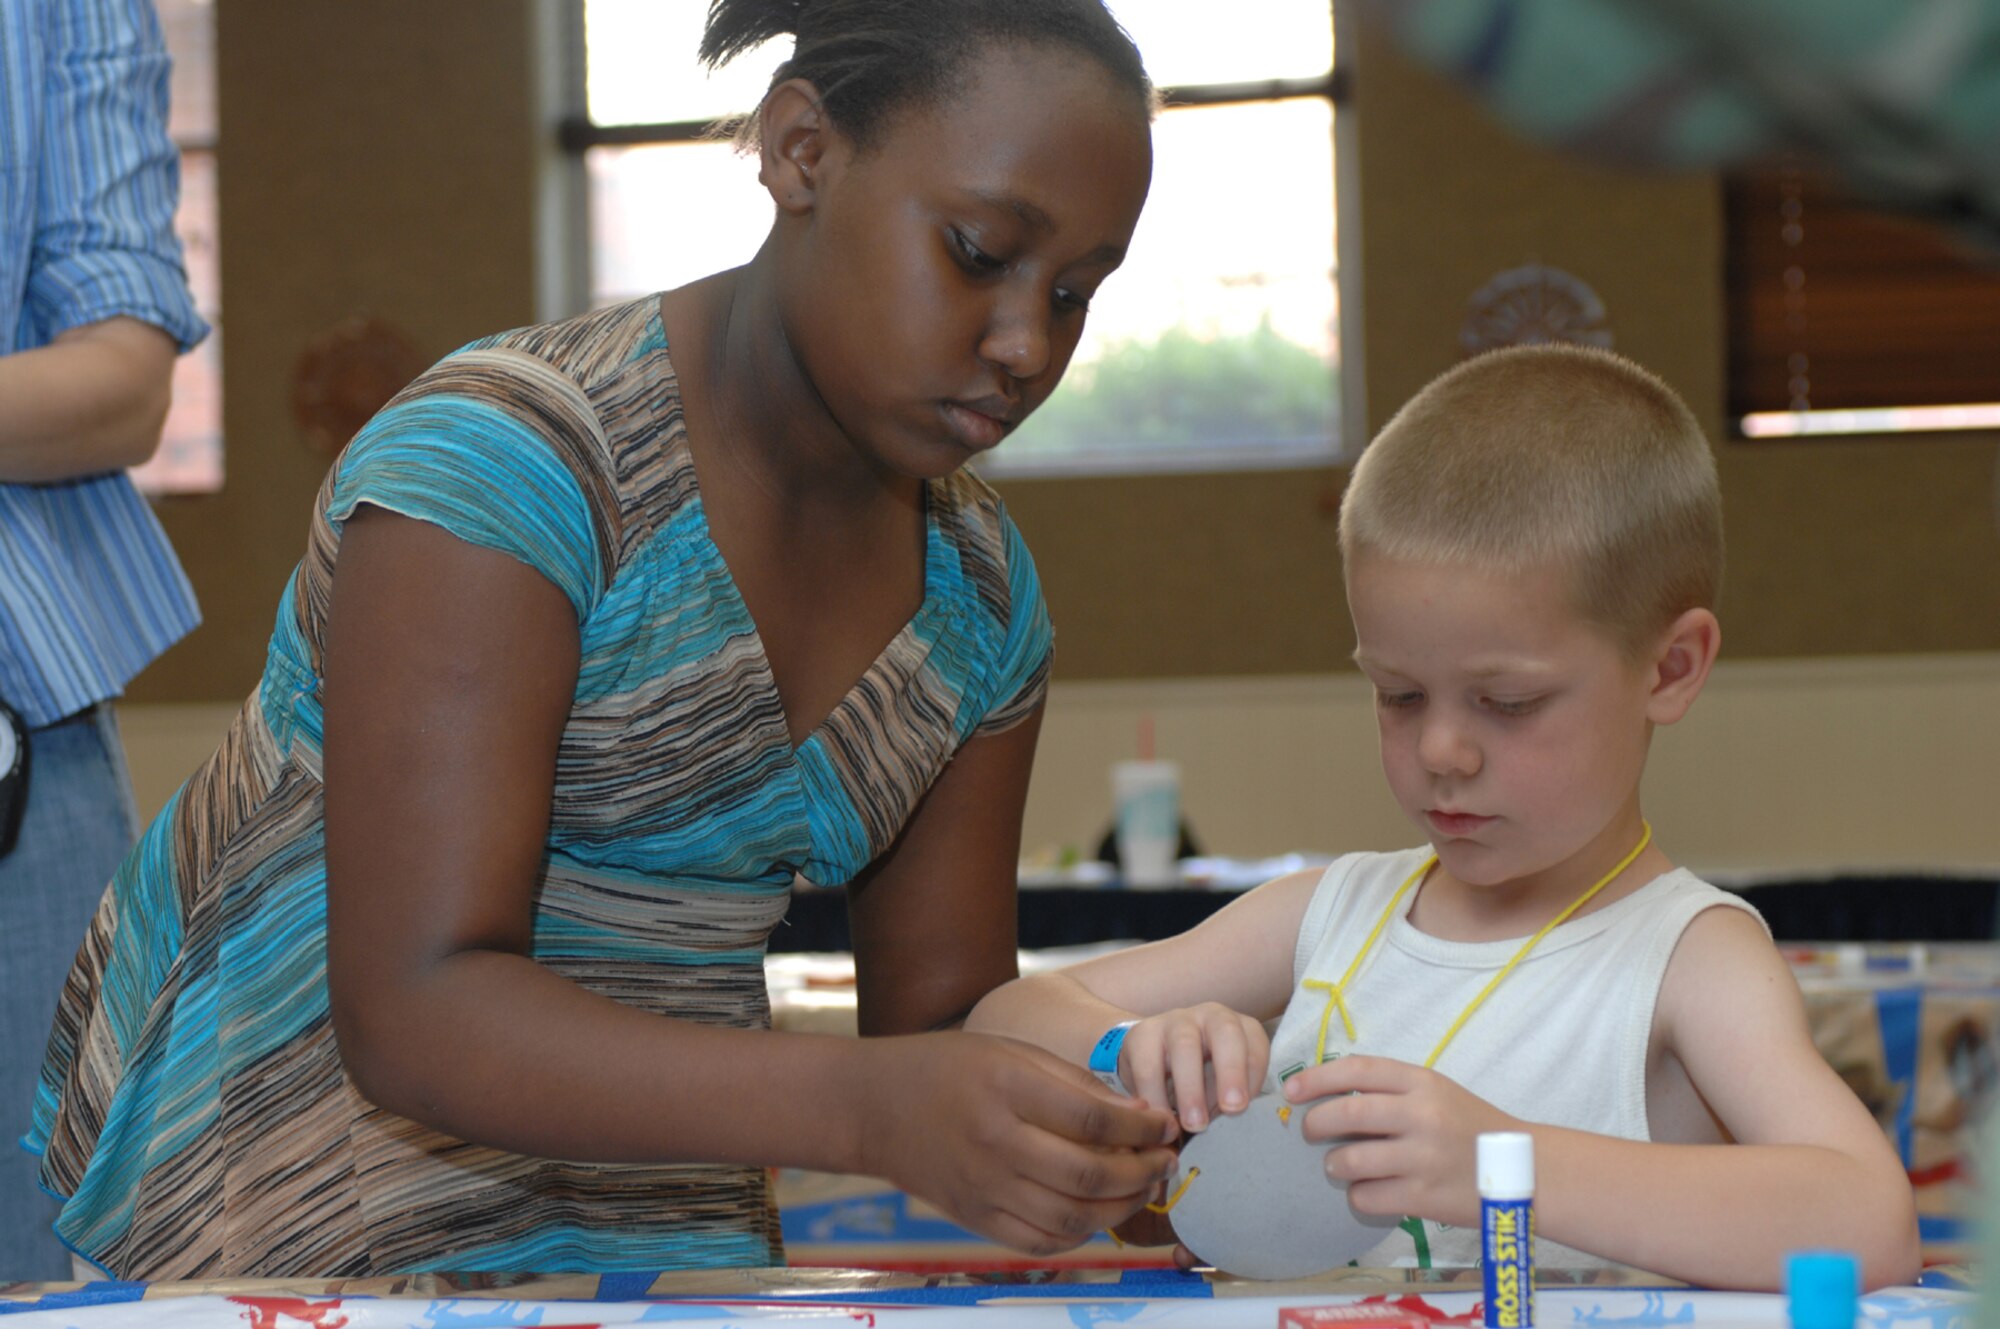 DYESS AIR FORCE BASE, Texas -- Tajninque Bottom (left) helps Conner Stimmle with his arts and crafts project at Vacation Bible School at the chapel June 6. During the course of the day, children do various activities to learn Bible lessons in a fun way. (U.S. Air Force photo by A1C Jennifer Romig)